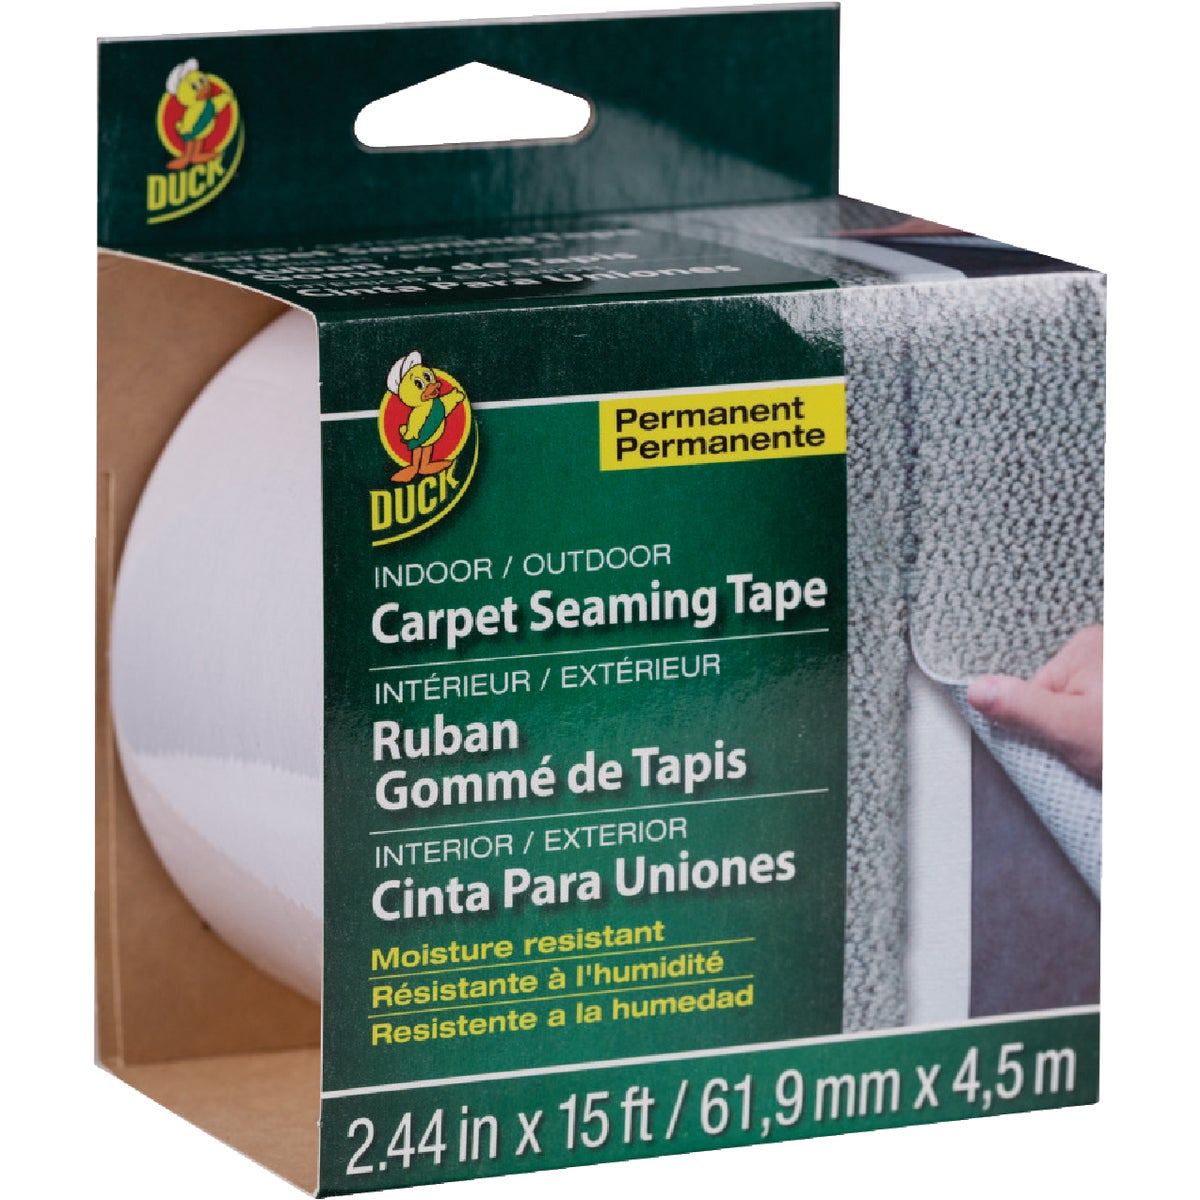 Duck 2.44 In. x 15 Ft. White Indoor/Outdoor Seaming Carpet Tape